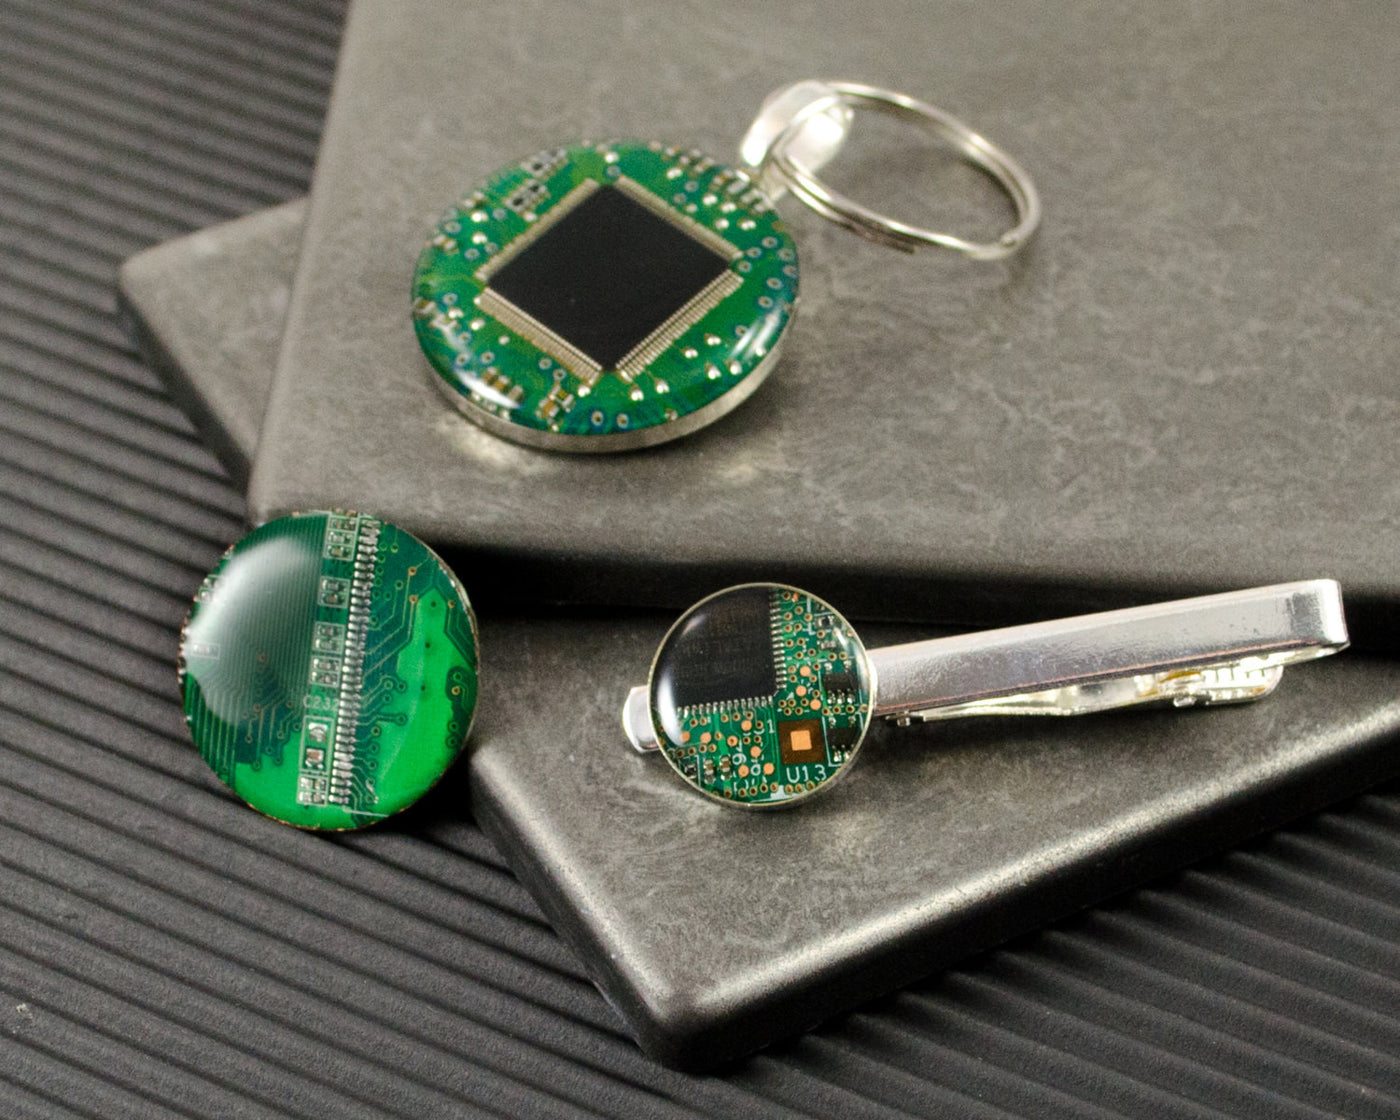 green circuit board tie bar magnet and keychain